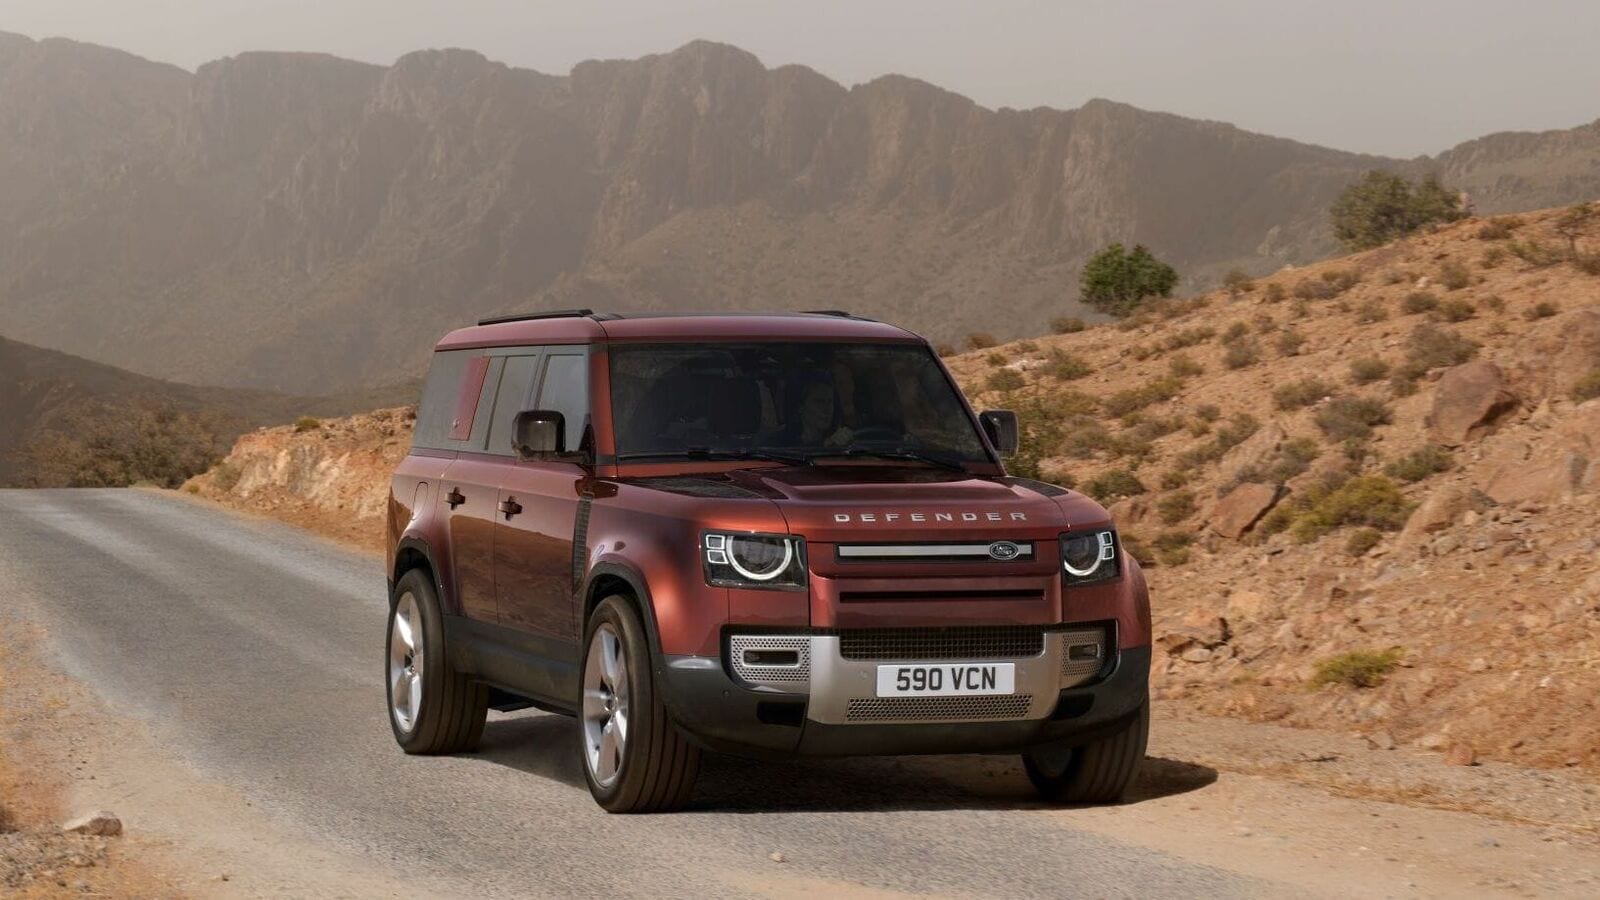 Land Rover Defender 130 launched in India, prices start at ₹1.30 crore